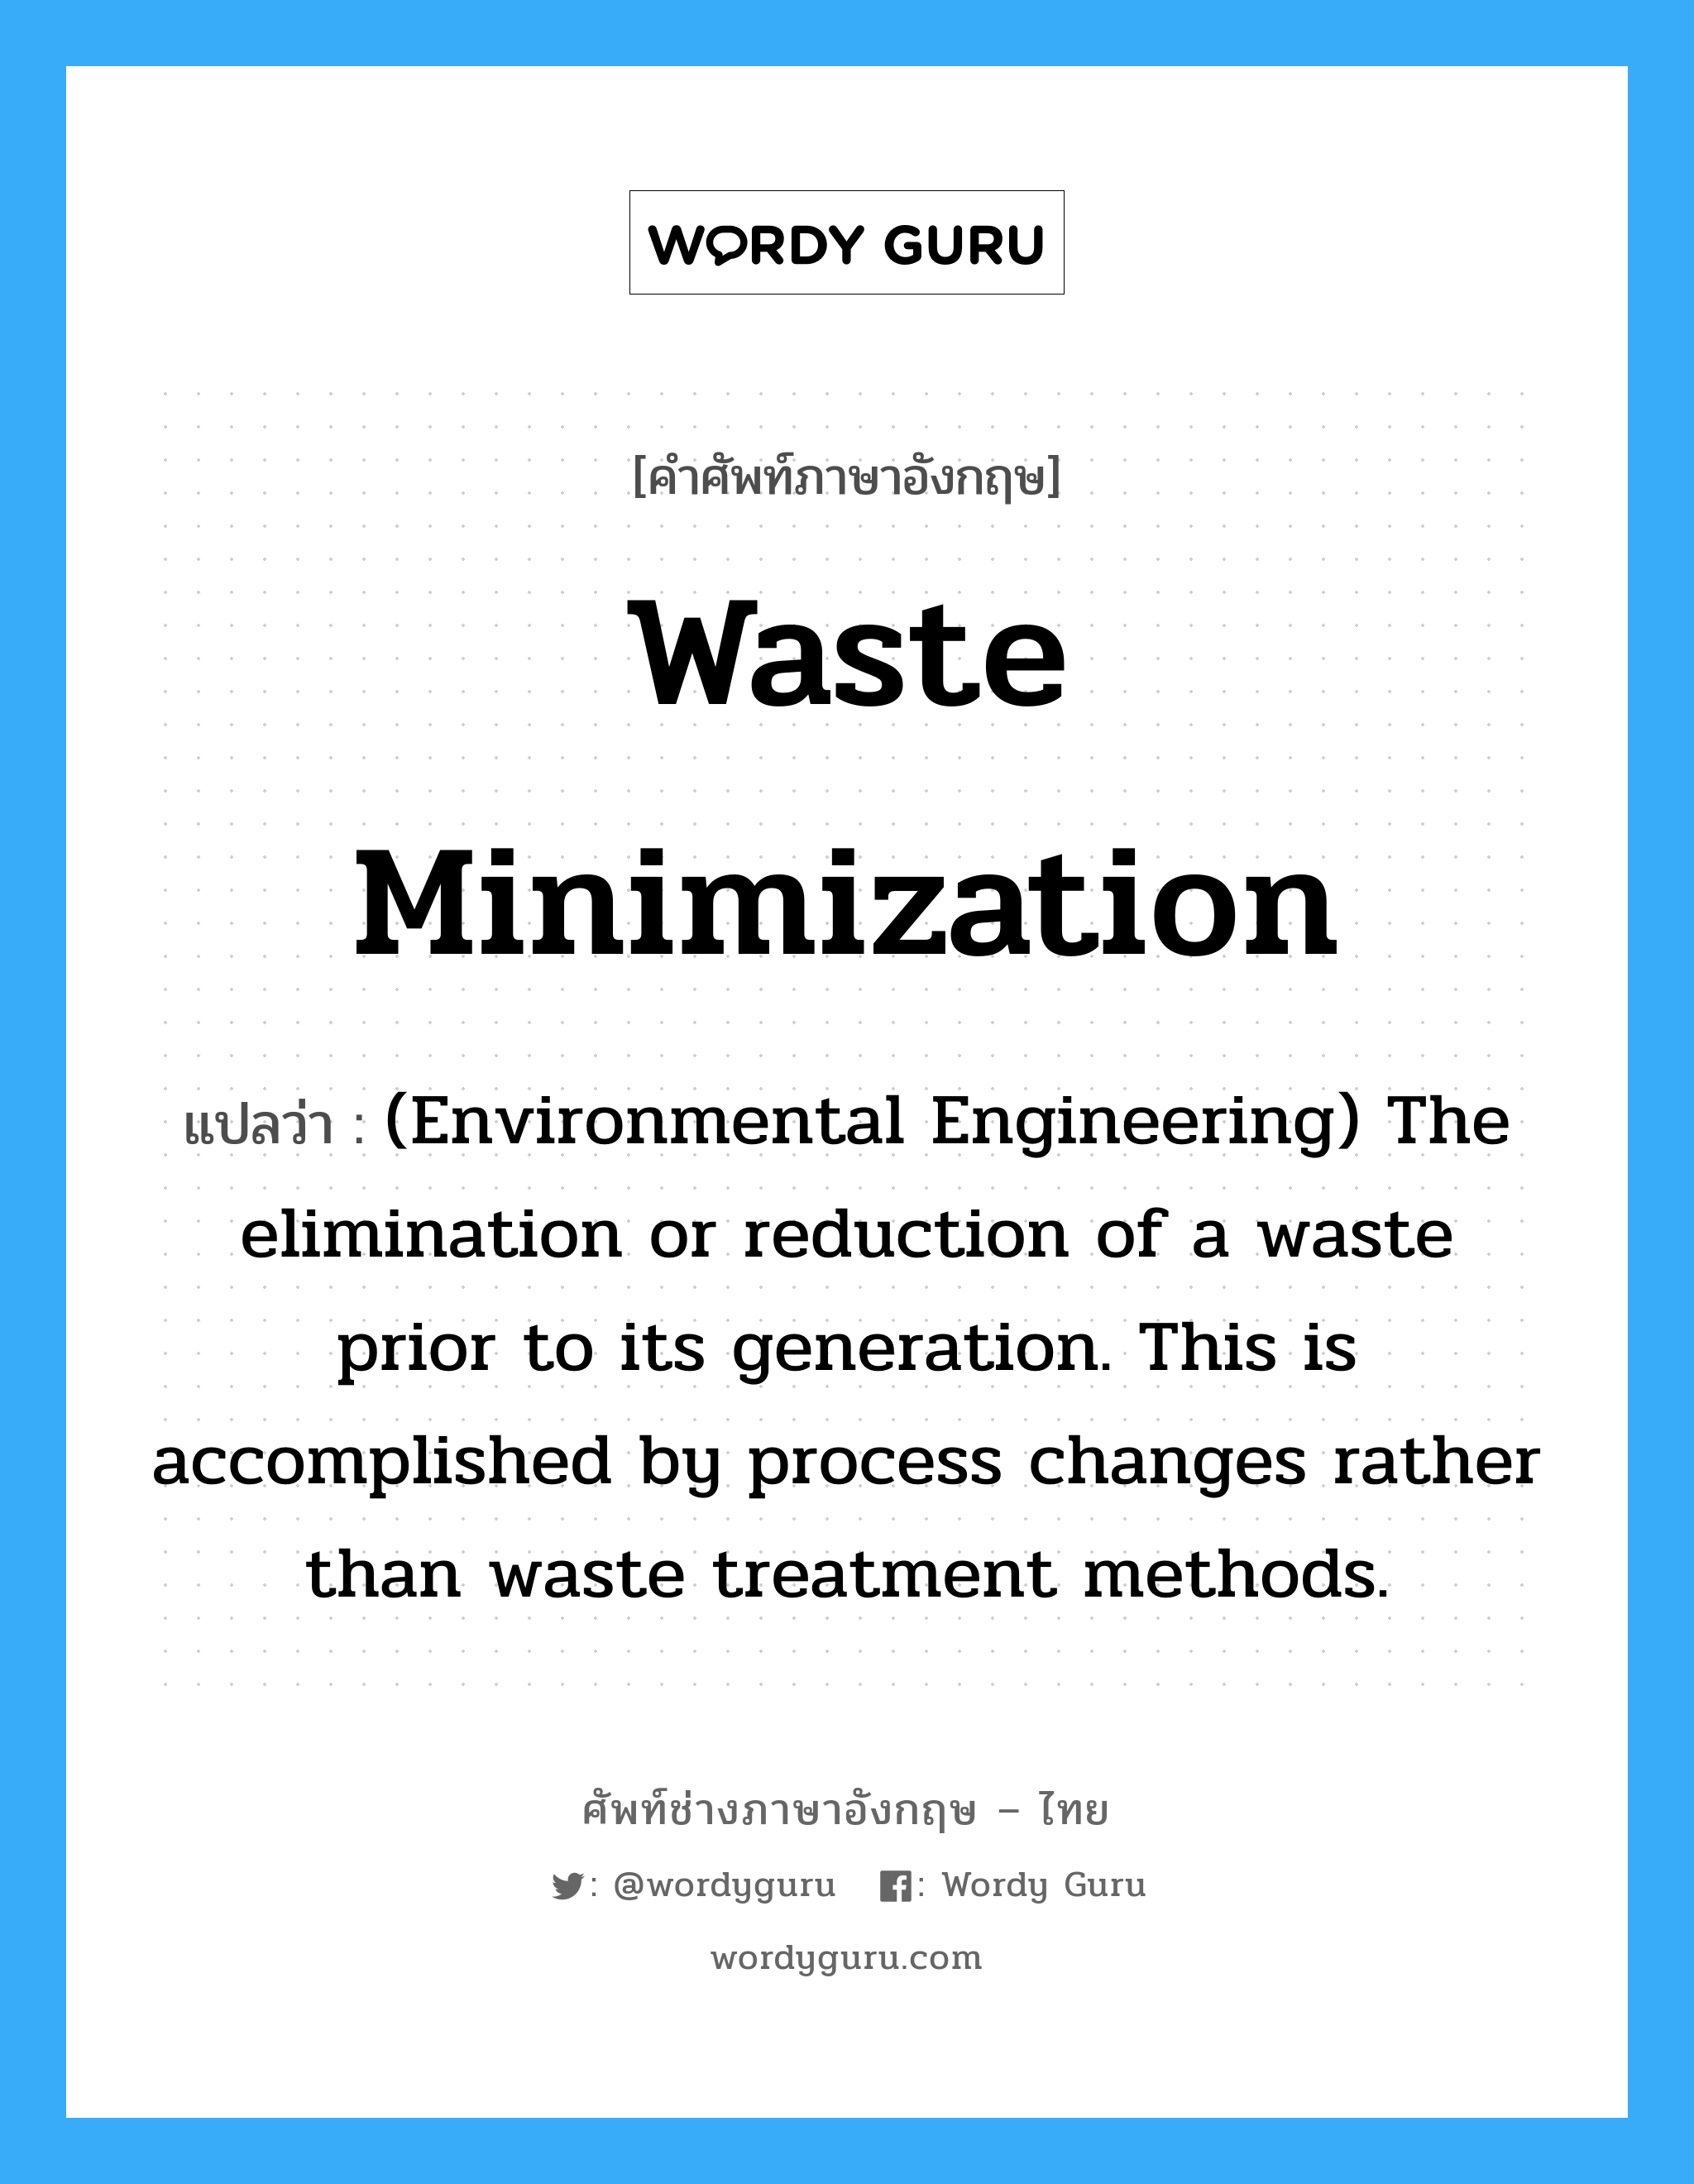 Waste minimization แปลว่า?, คำศัพท์ช่างภาษาอังกฤษ - ไทย Waste minimization คำศัพท์ภาษาอังกฤษ Waste minimization แปลว่า (Environmental Engineering) The elimination or reduction of a waste prior to its generation. This is accomplished by process changes rather than waste treatment methods.